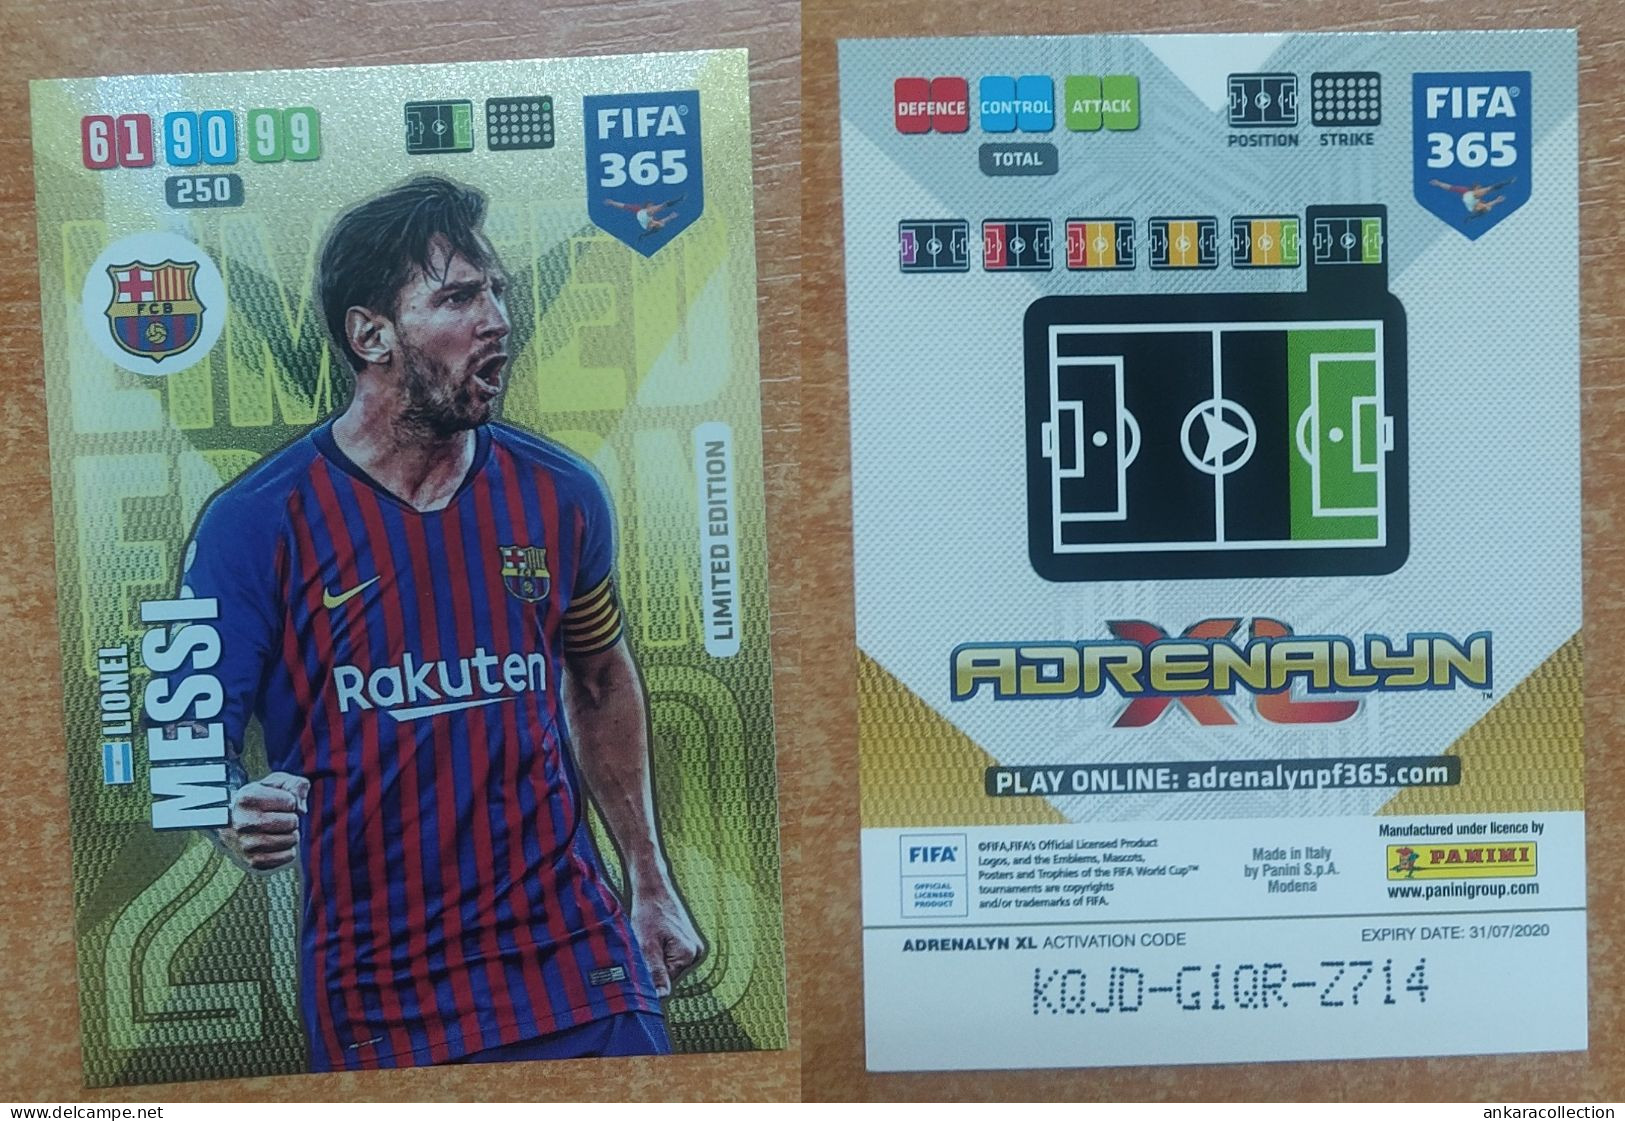 AC - LIONEL MESSI  BARCELONA  LIMITED EDITION  PANINI FIFA 365 2020 ADRENALYN TRADING CARD - Trading Cards